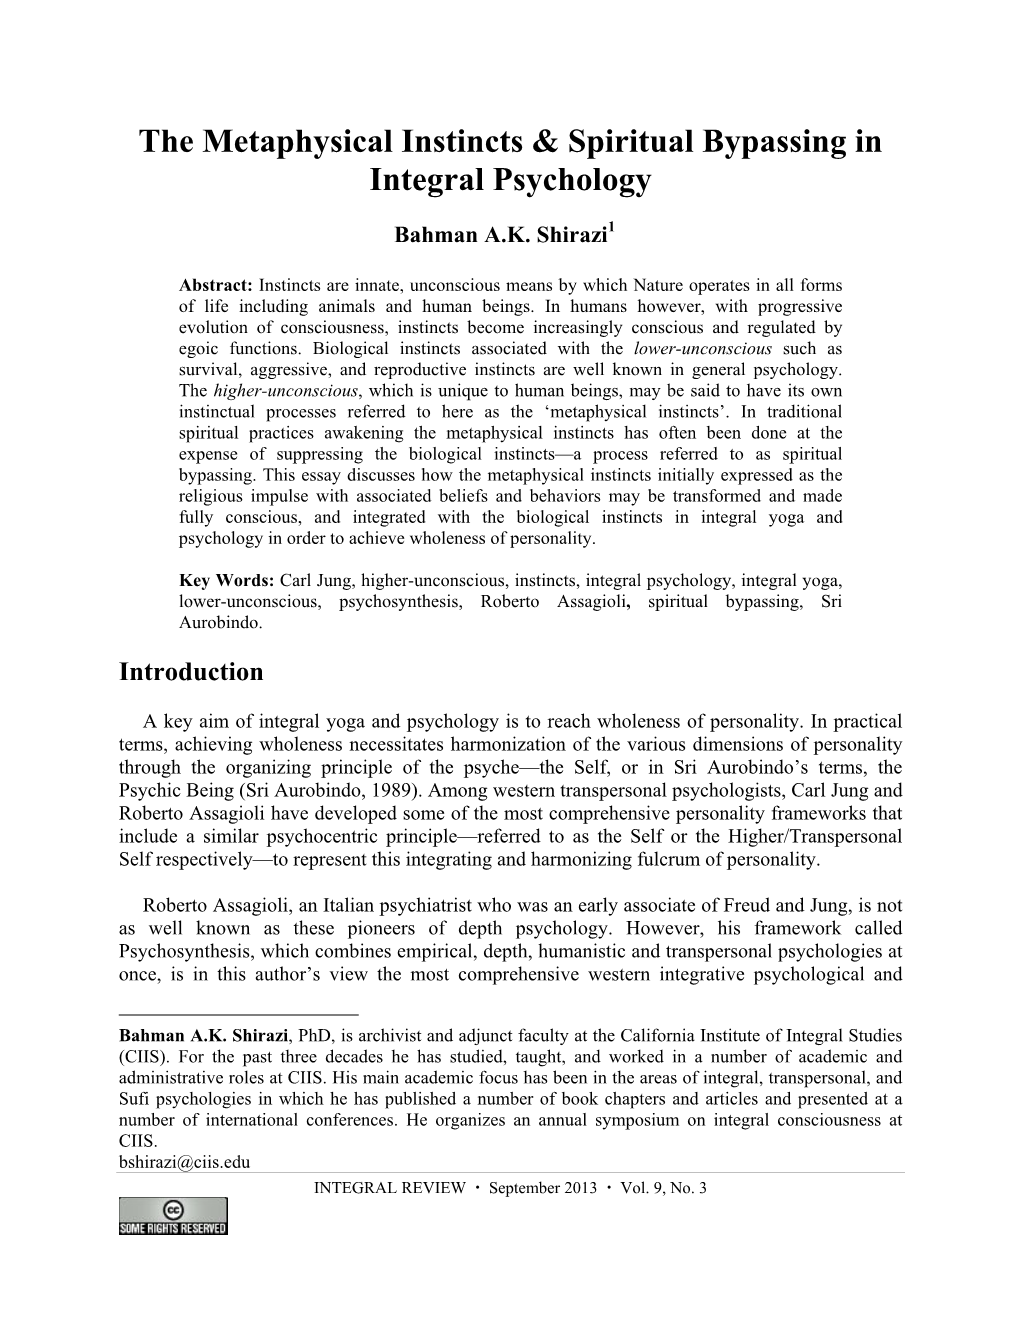 The Metaphysical Instincts & Spiritual Bypassing in Integral Psychology